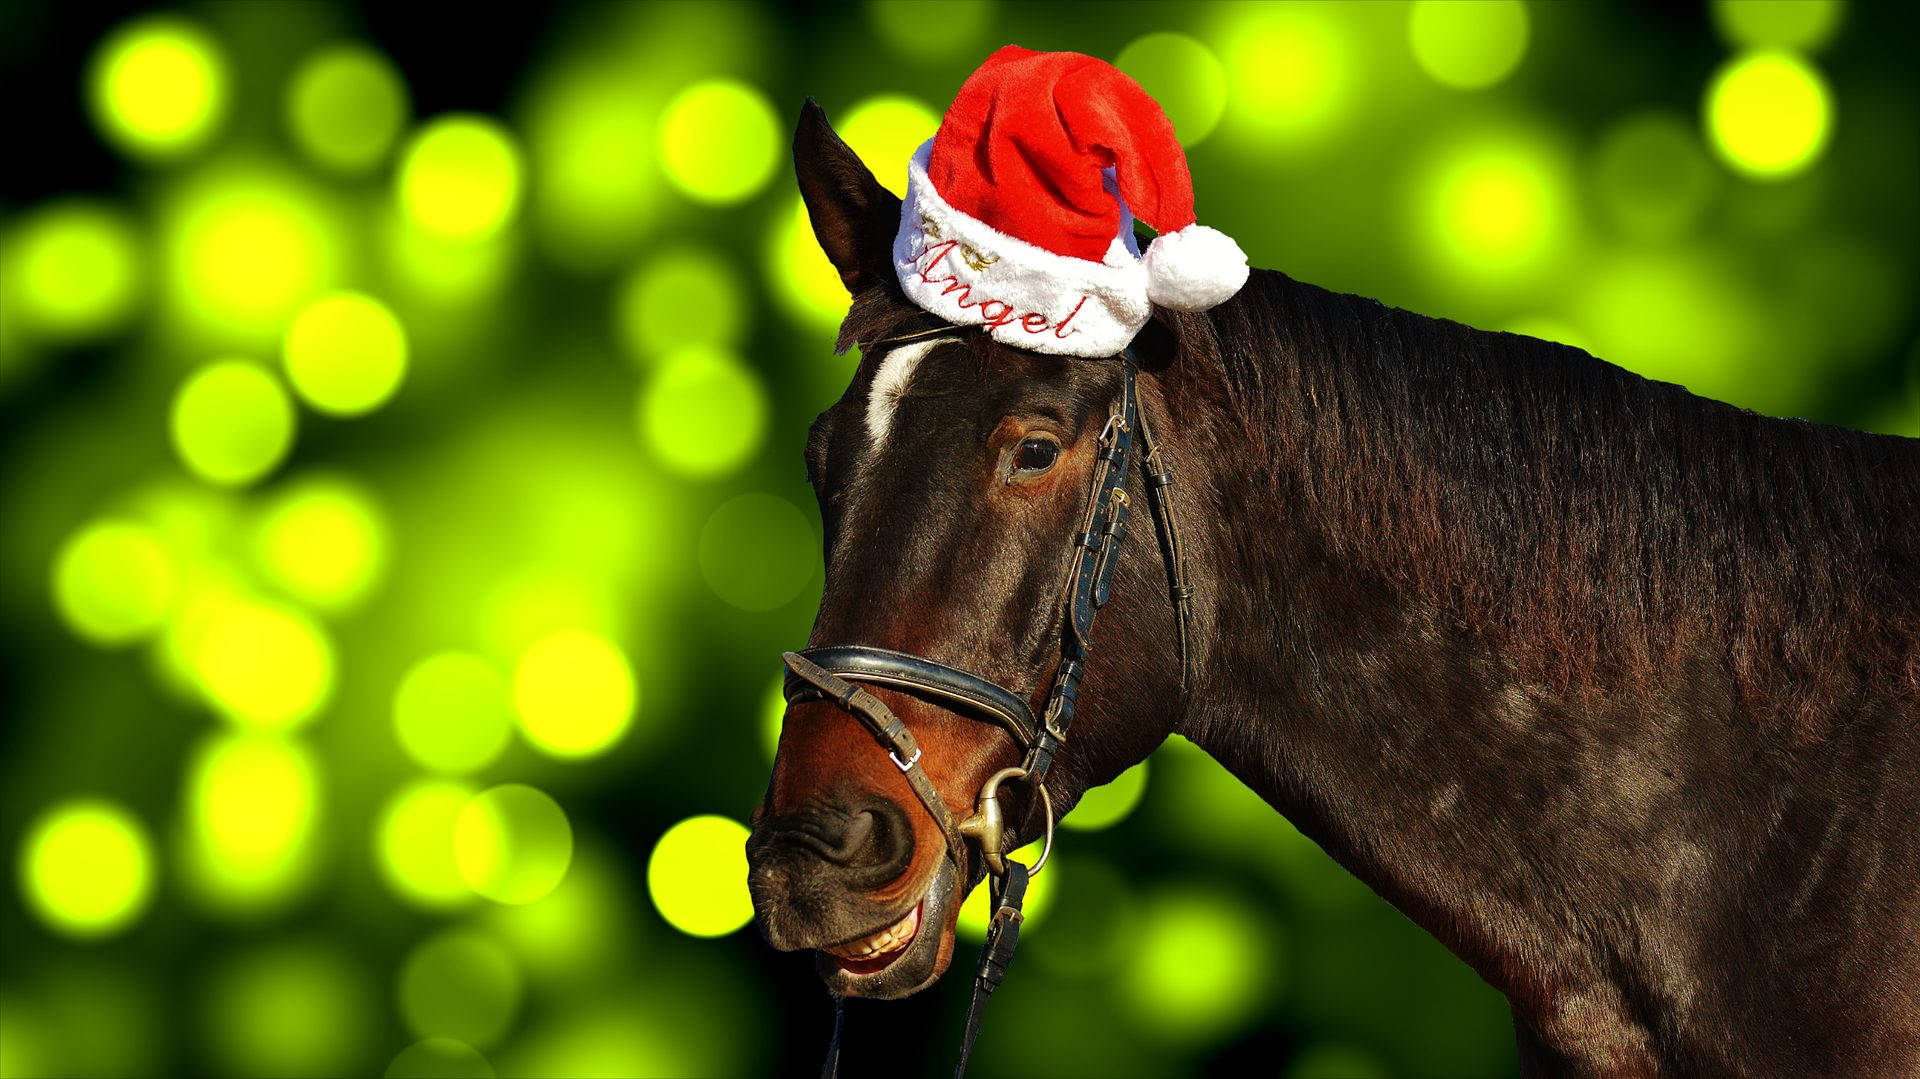 Adorable Horse Wearing Santa Hat For Christmas Background